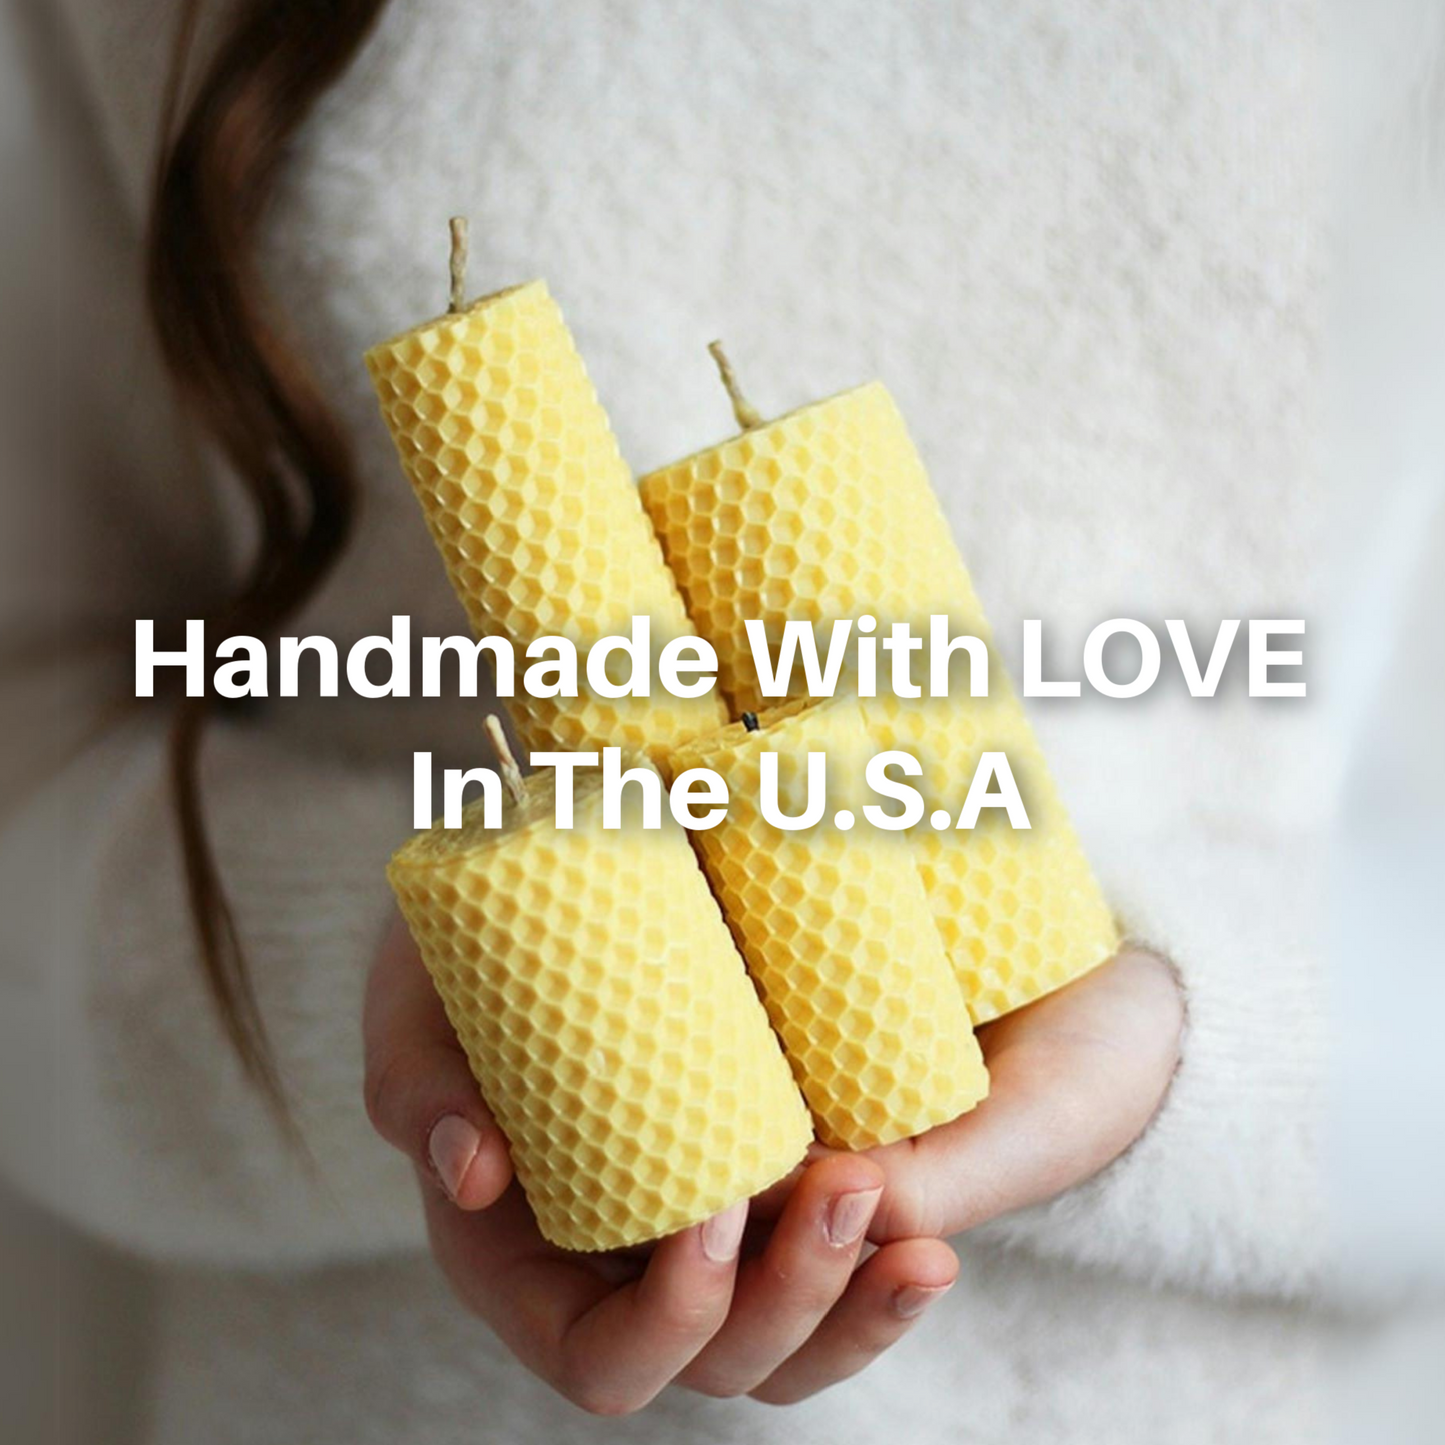 100% Natural Beeswax Candle